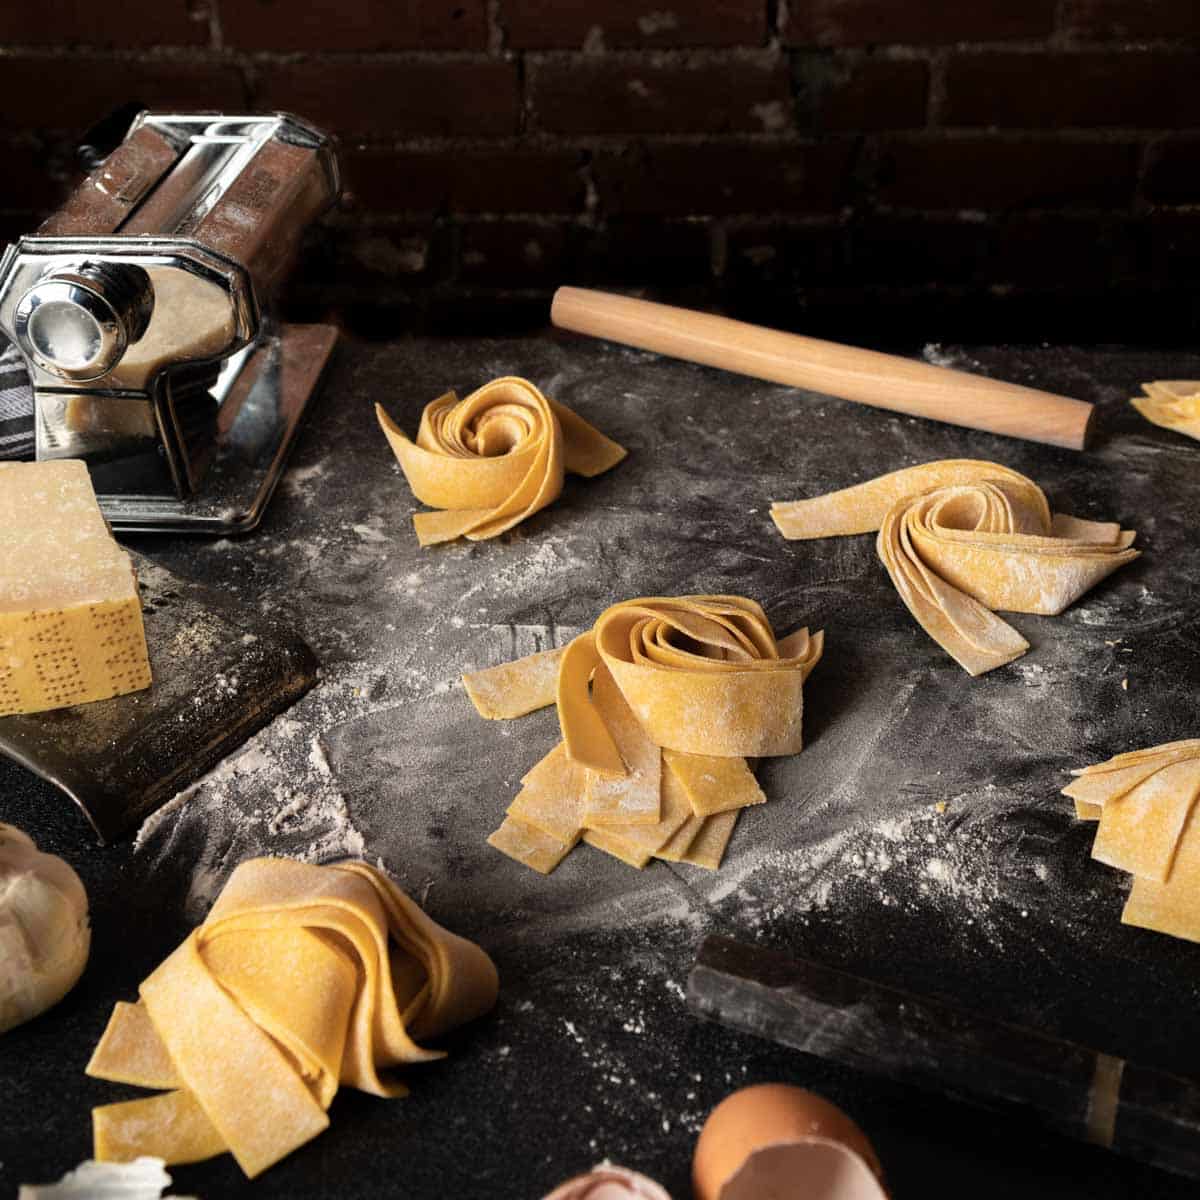 Several spiraled nests of homemade pappardelle pasta noodles. 